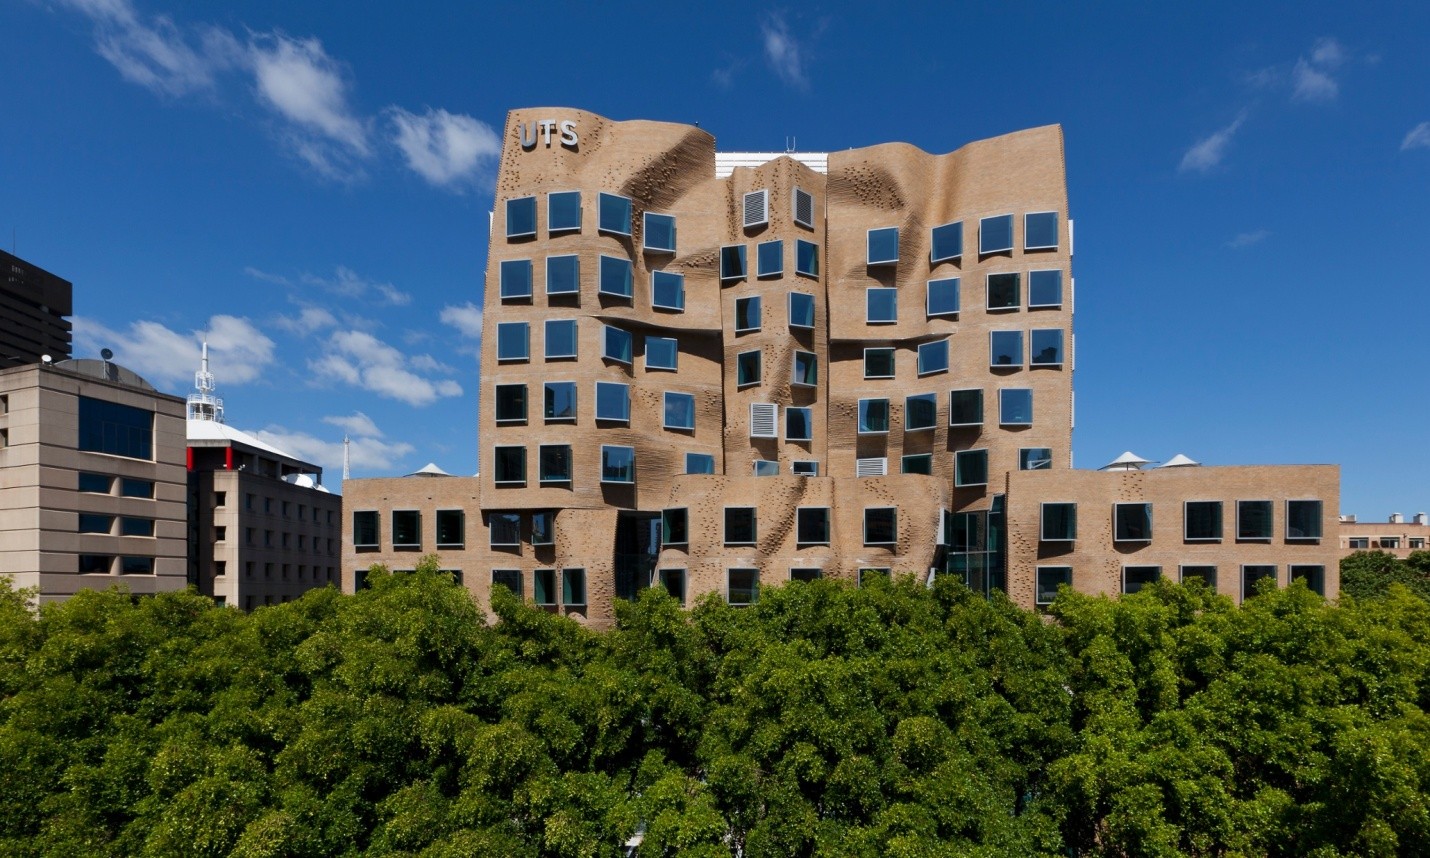 The 4 Most Amusing Responses to Frank Gehry's UTS Business School | ArchDaily